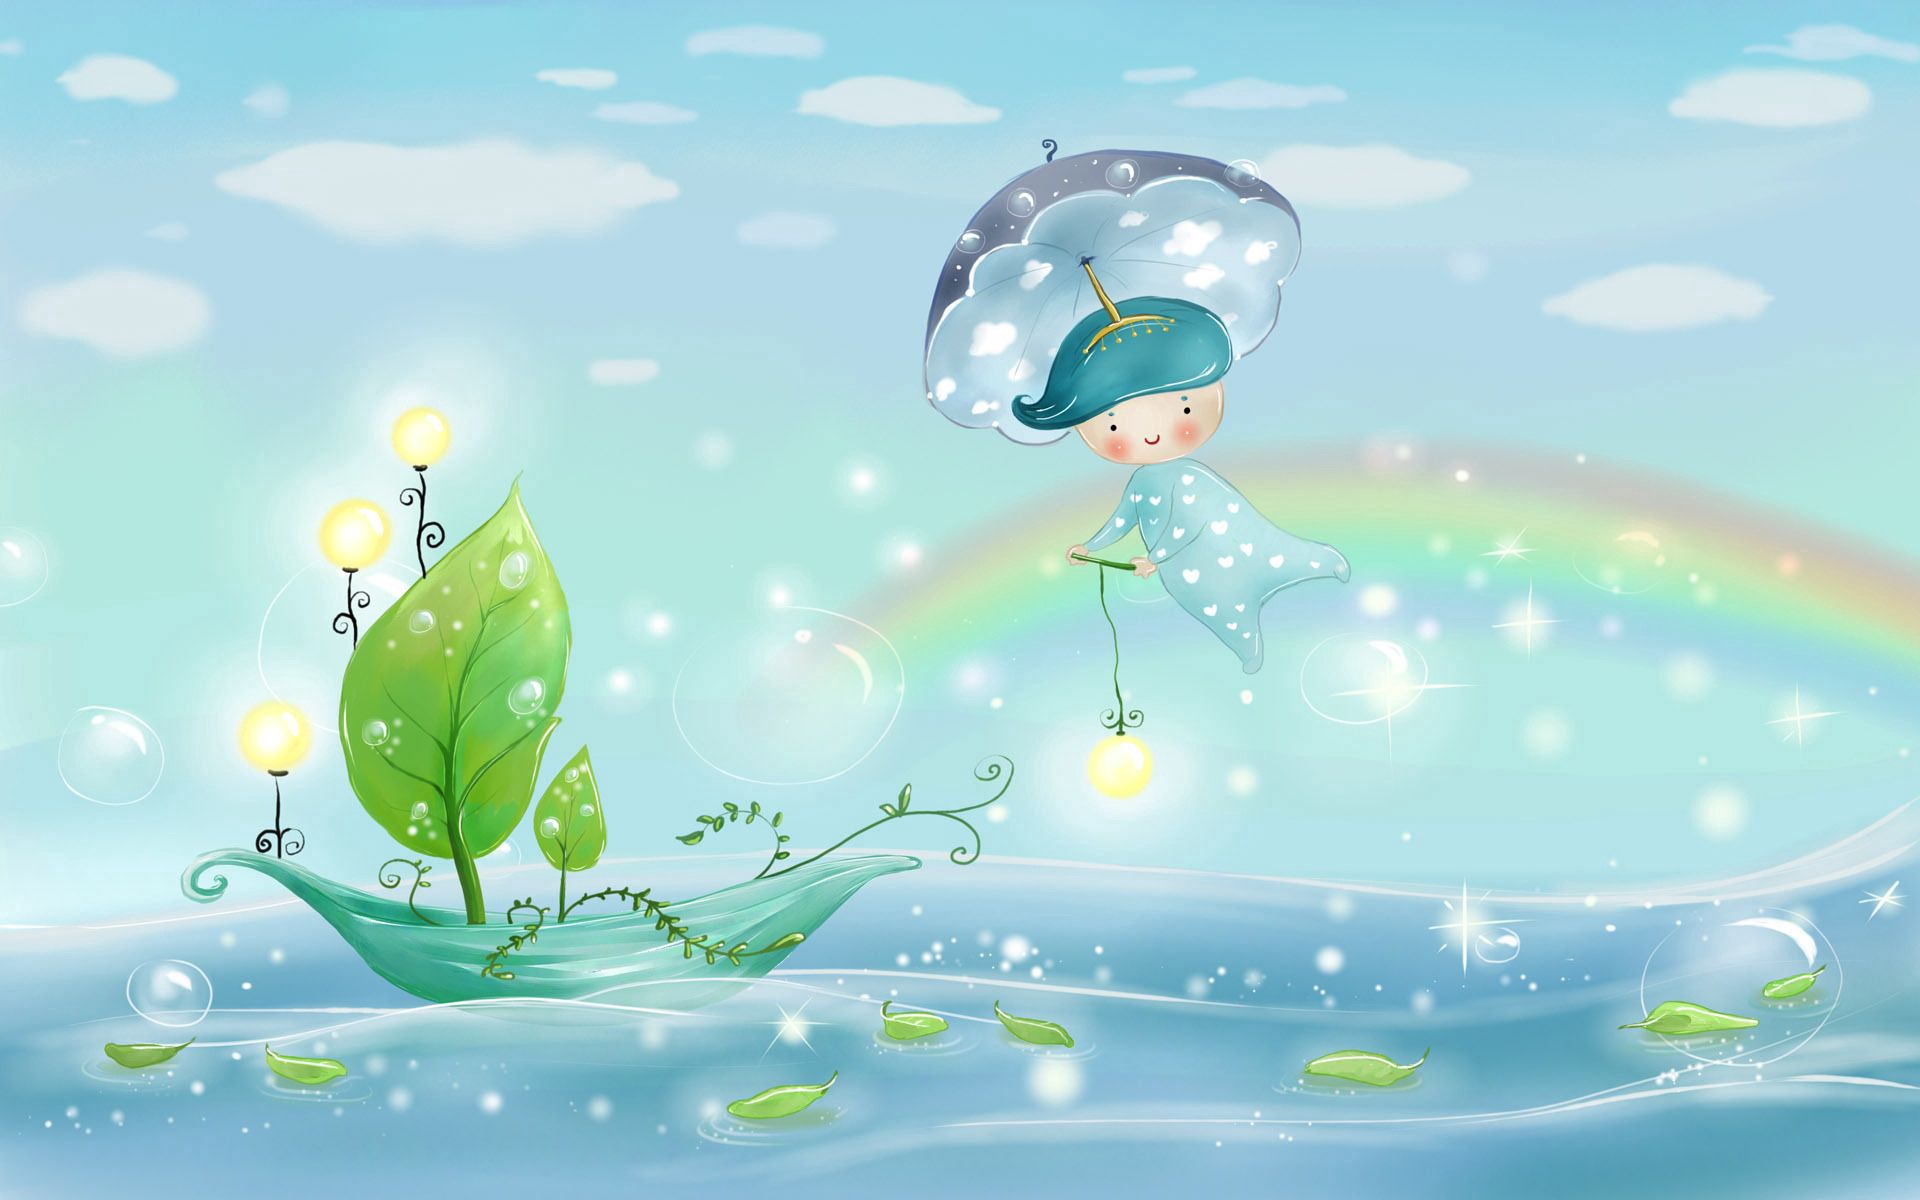 picture, vector, boat, lanterns, nature, water, sky, leaves, rain, sea, bubbles, clouds, rainbow, lights, shine, light, drawing, sail, umbrella, boy, weather images